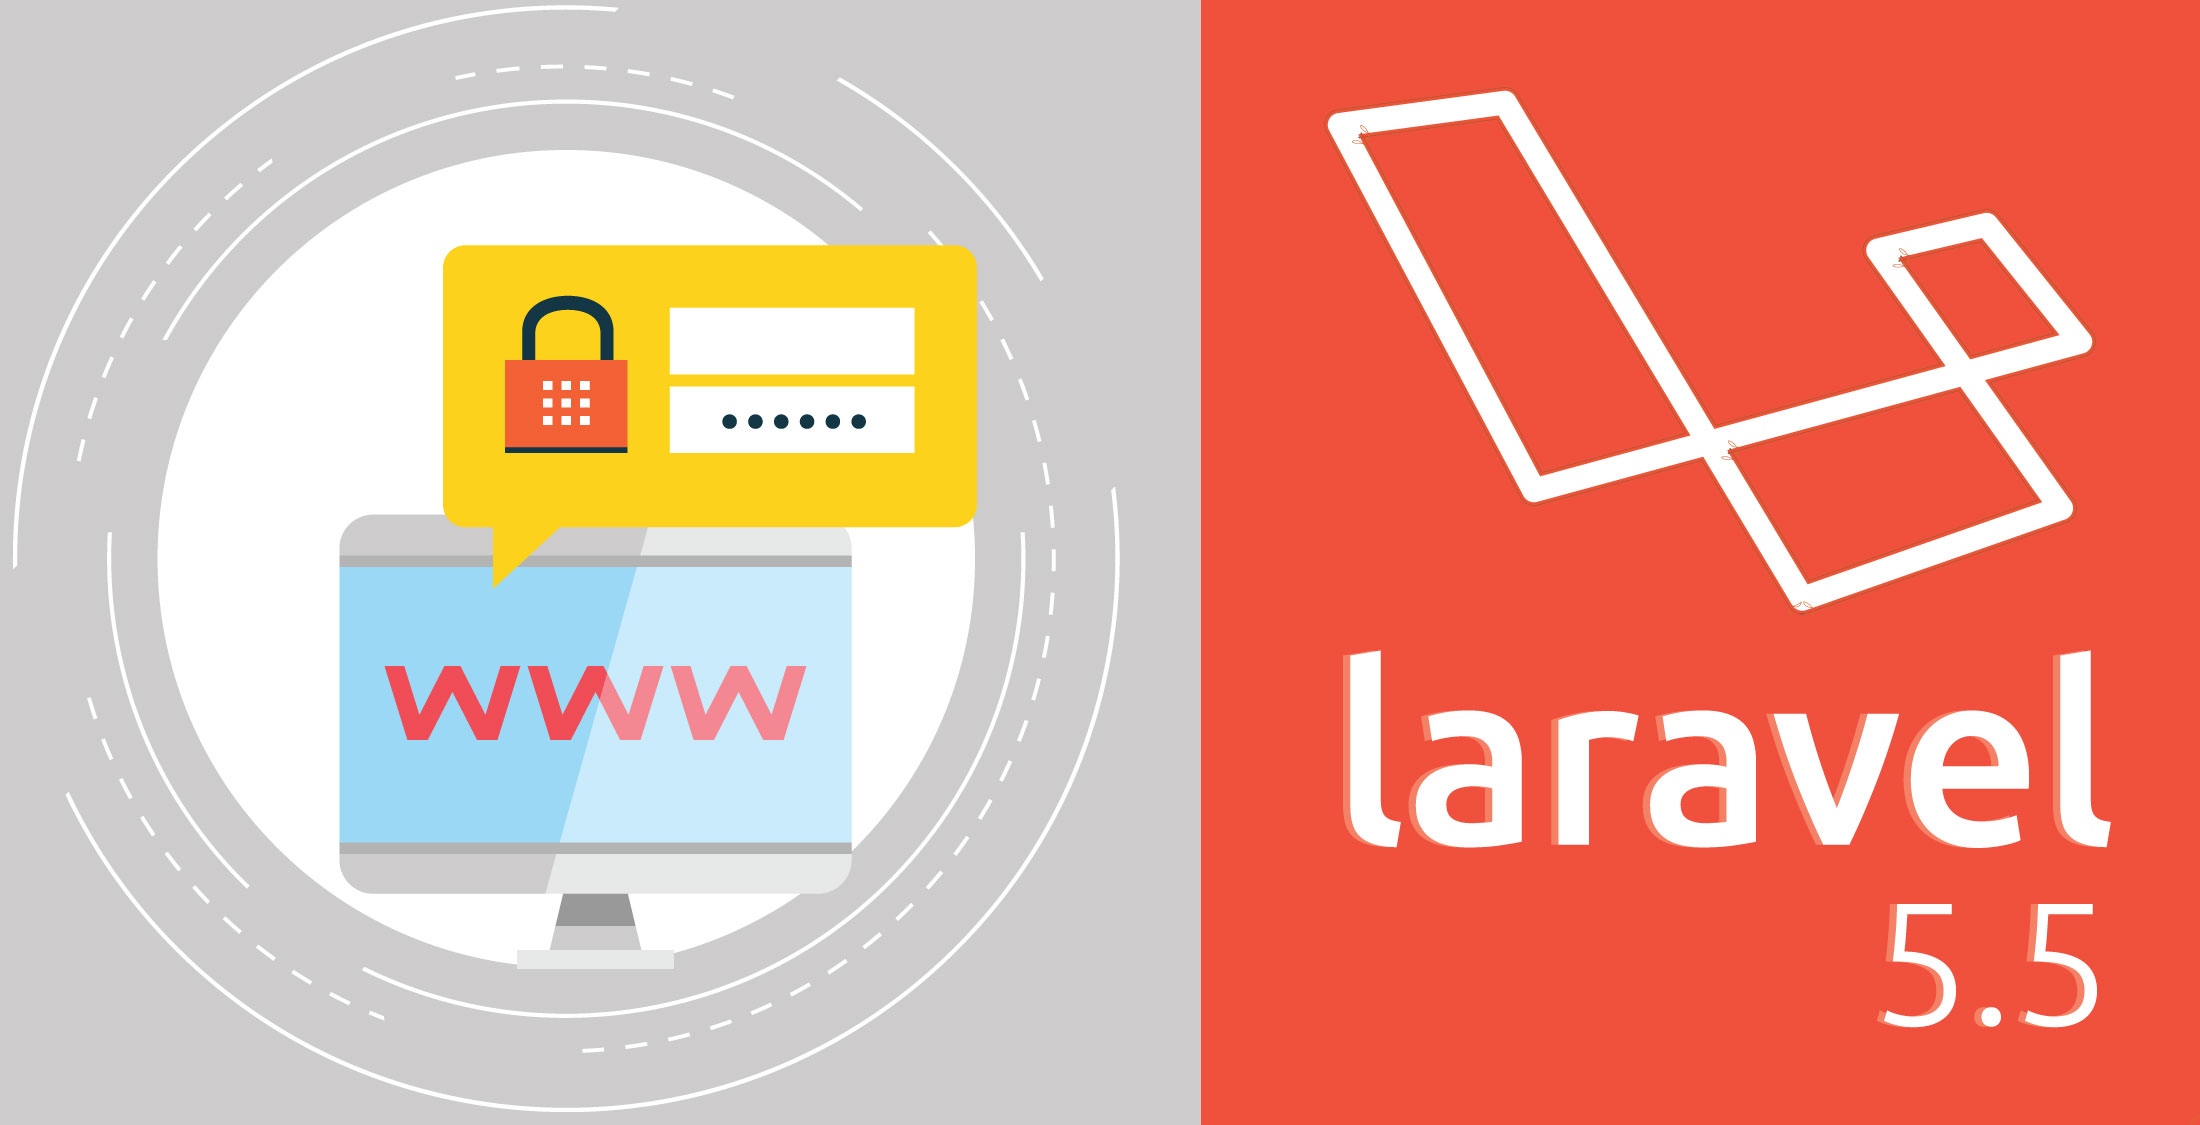 Redirect to previous URL after logging in, Laravel v5.5